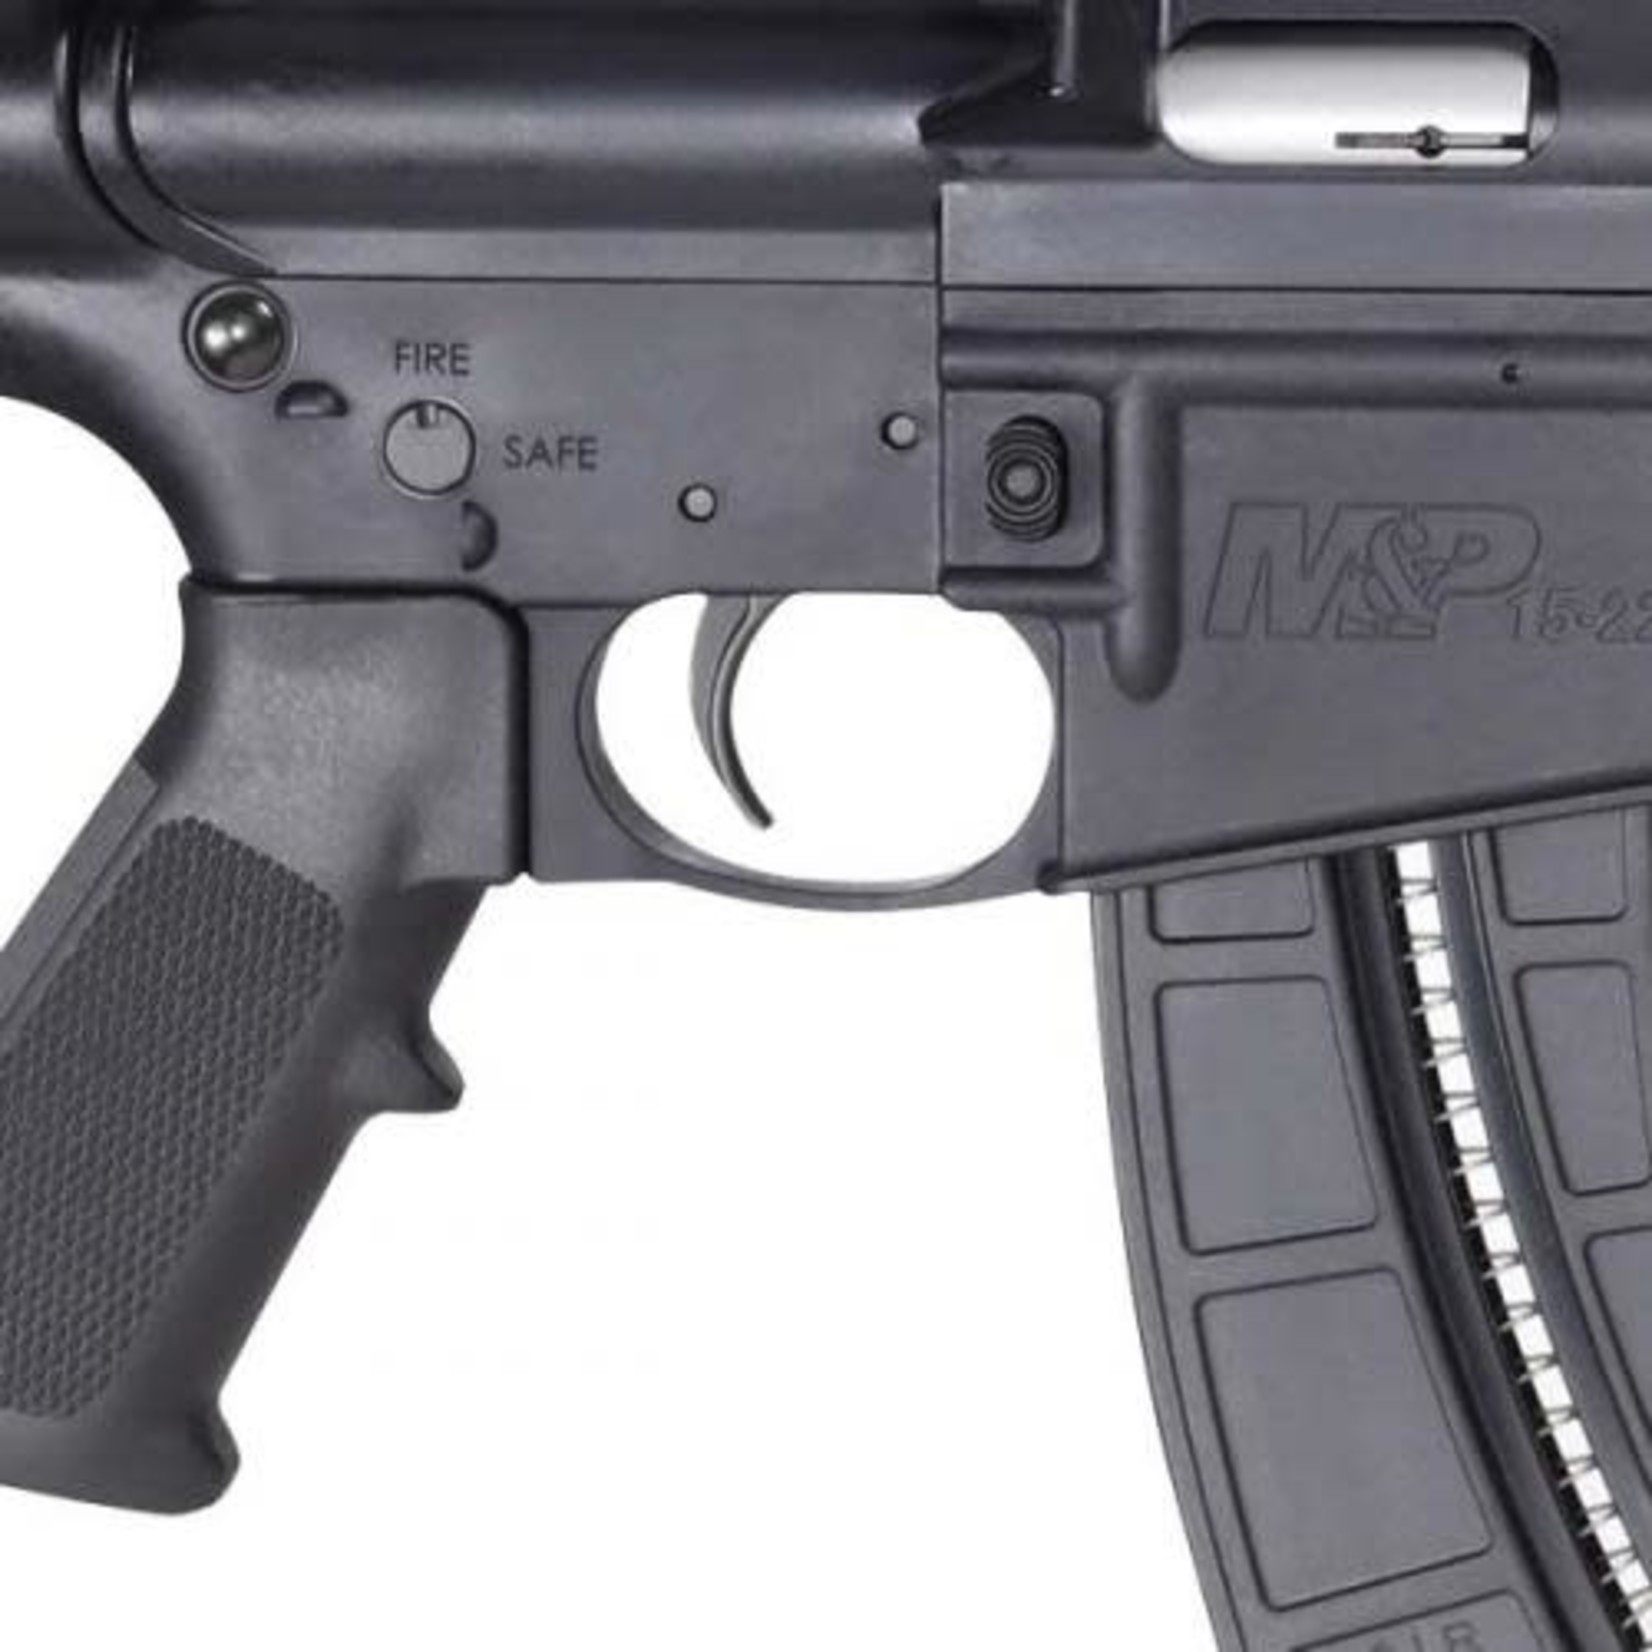 Smith and Wesson S&W M&P15-22 SPORT OR .22LR 16.5" MP100 RED/GRN DOT 25-RD